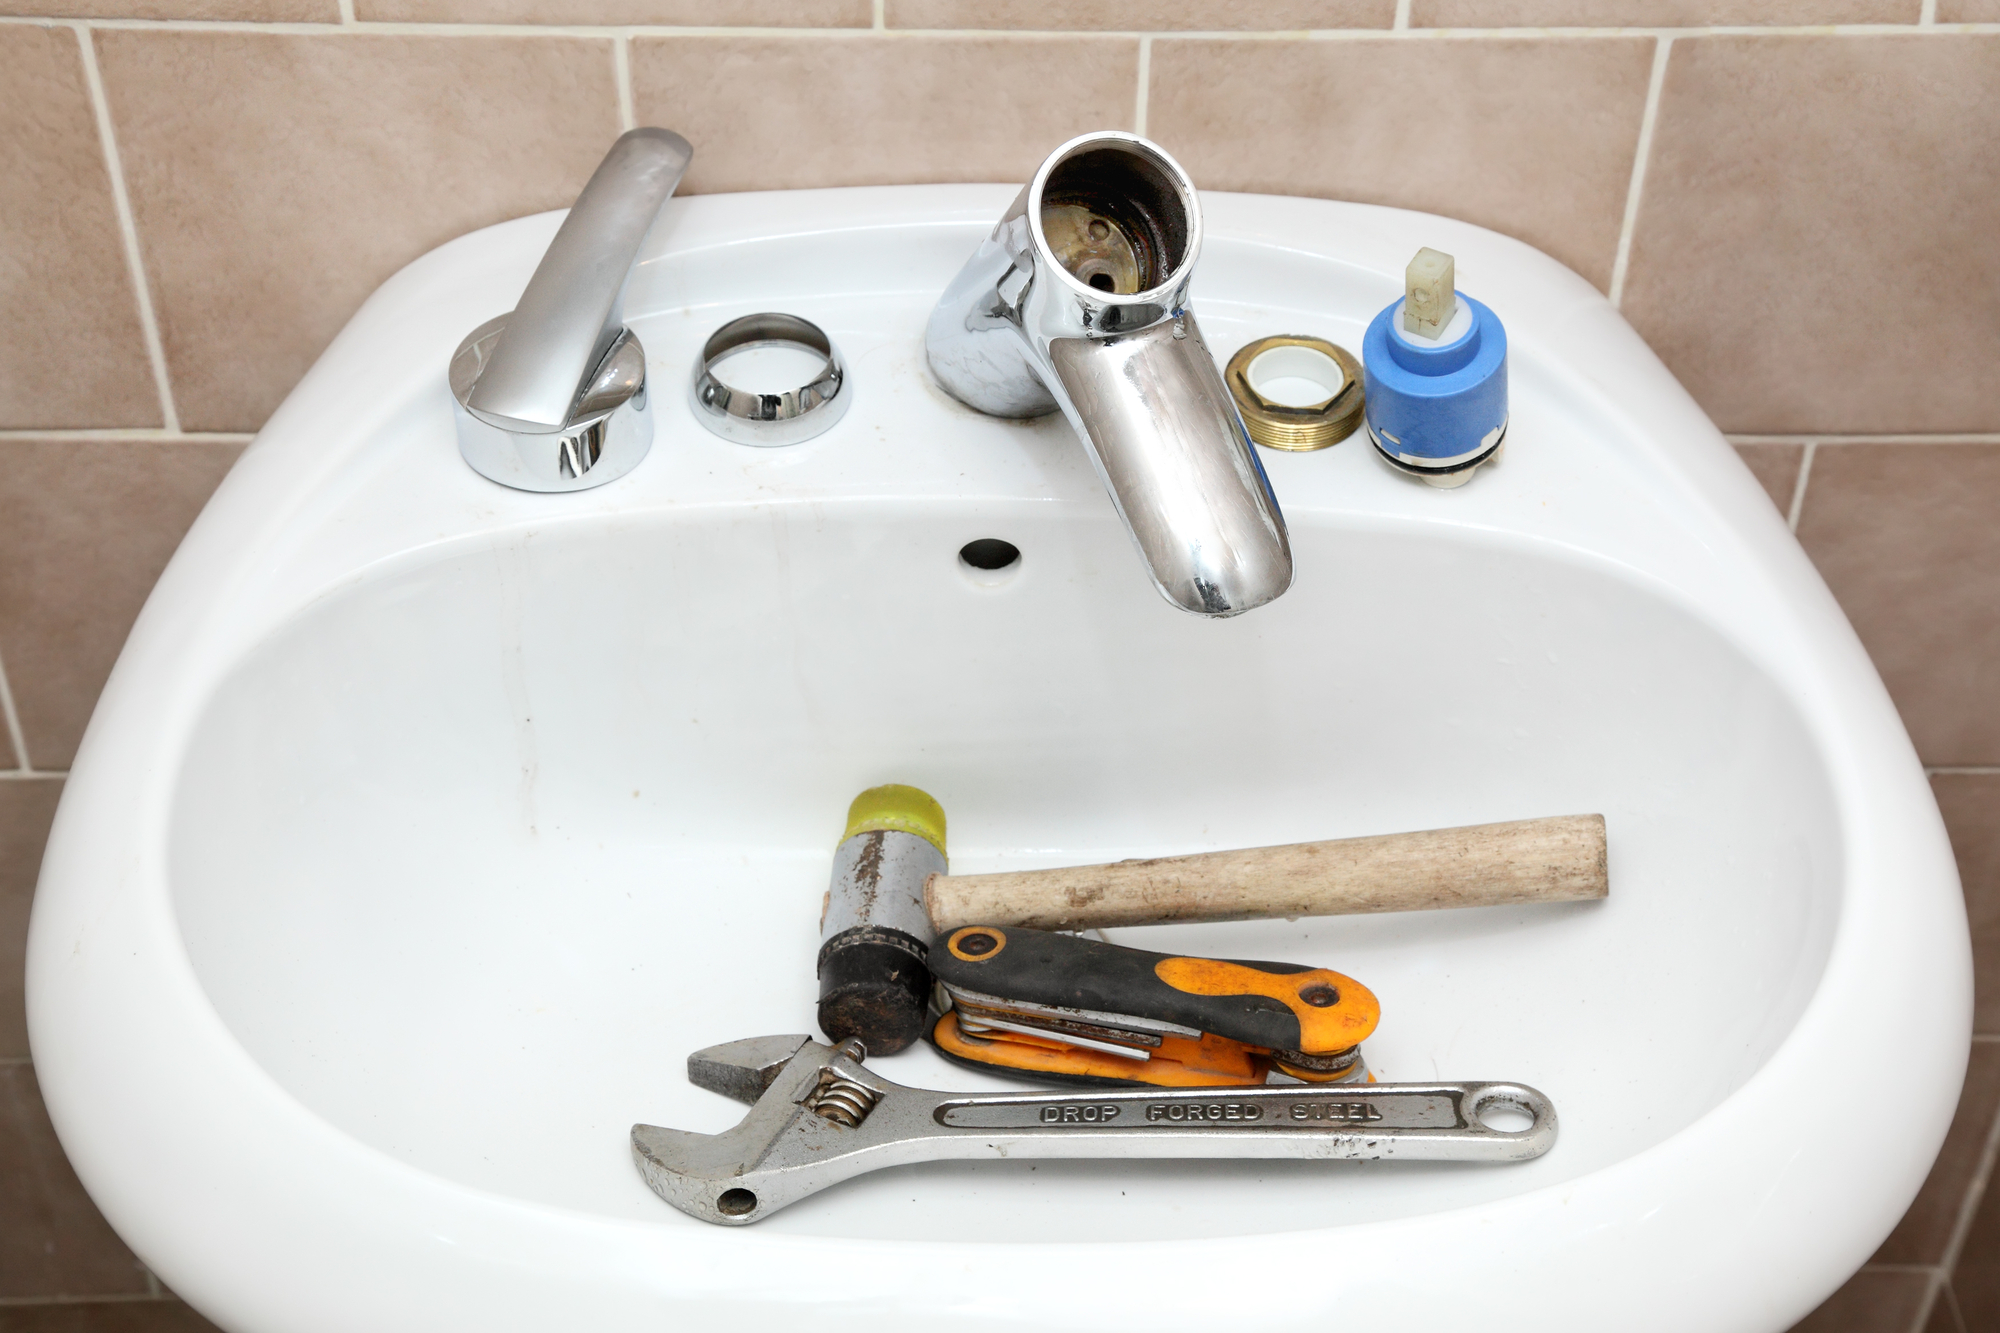 When Should you Call a Plumber to Unclog the Drain?